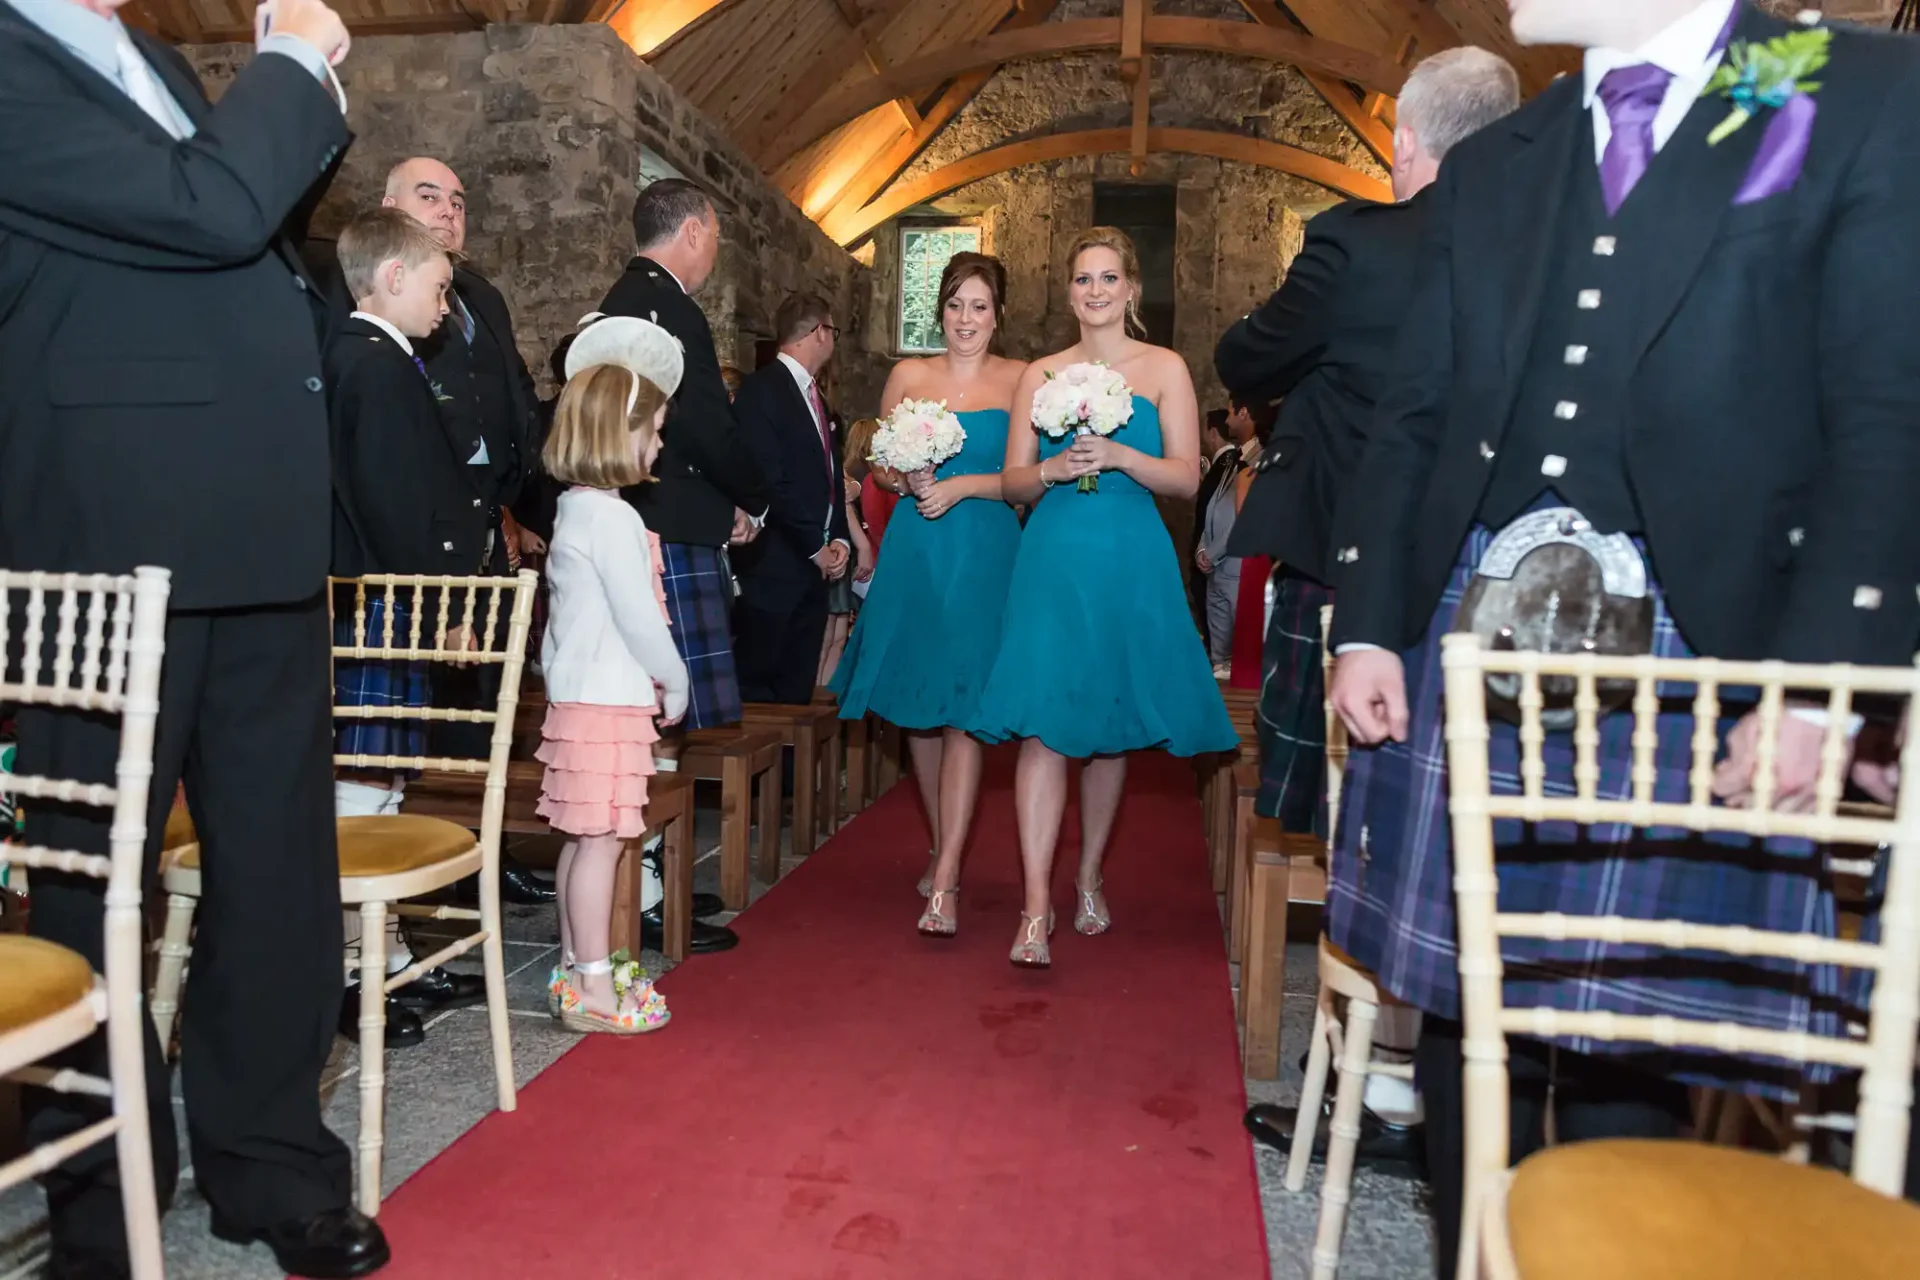 A wedding procession inside a stone chapel, with guests in formal attire, including kilts, watching two bridesmaids in blue dresses leading the way.